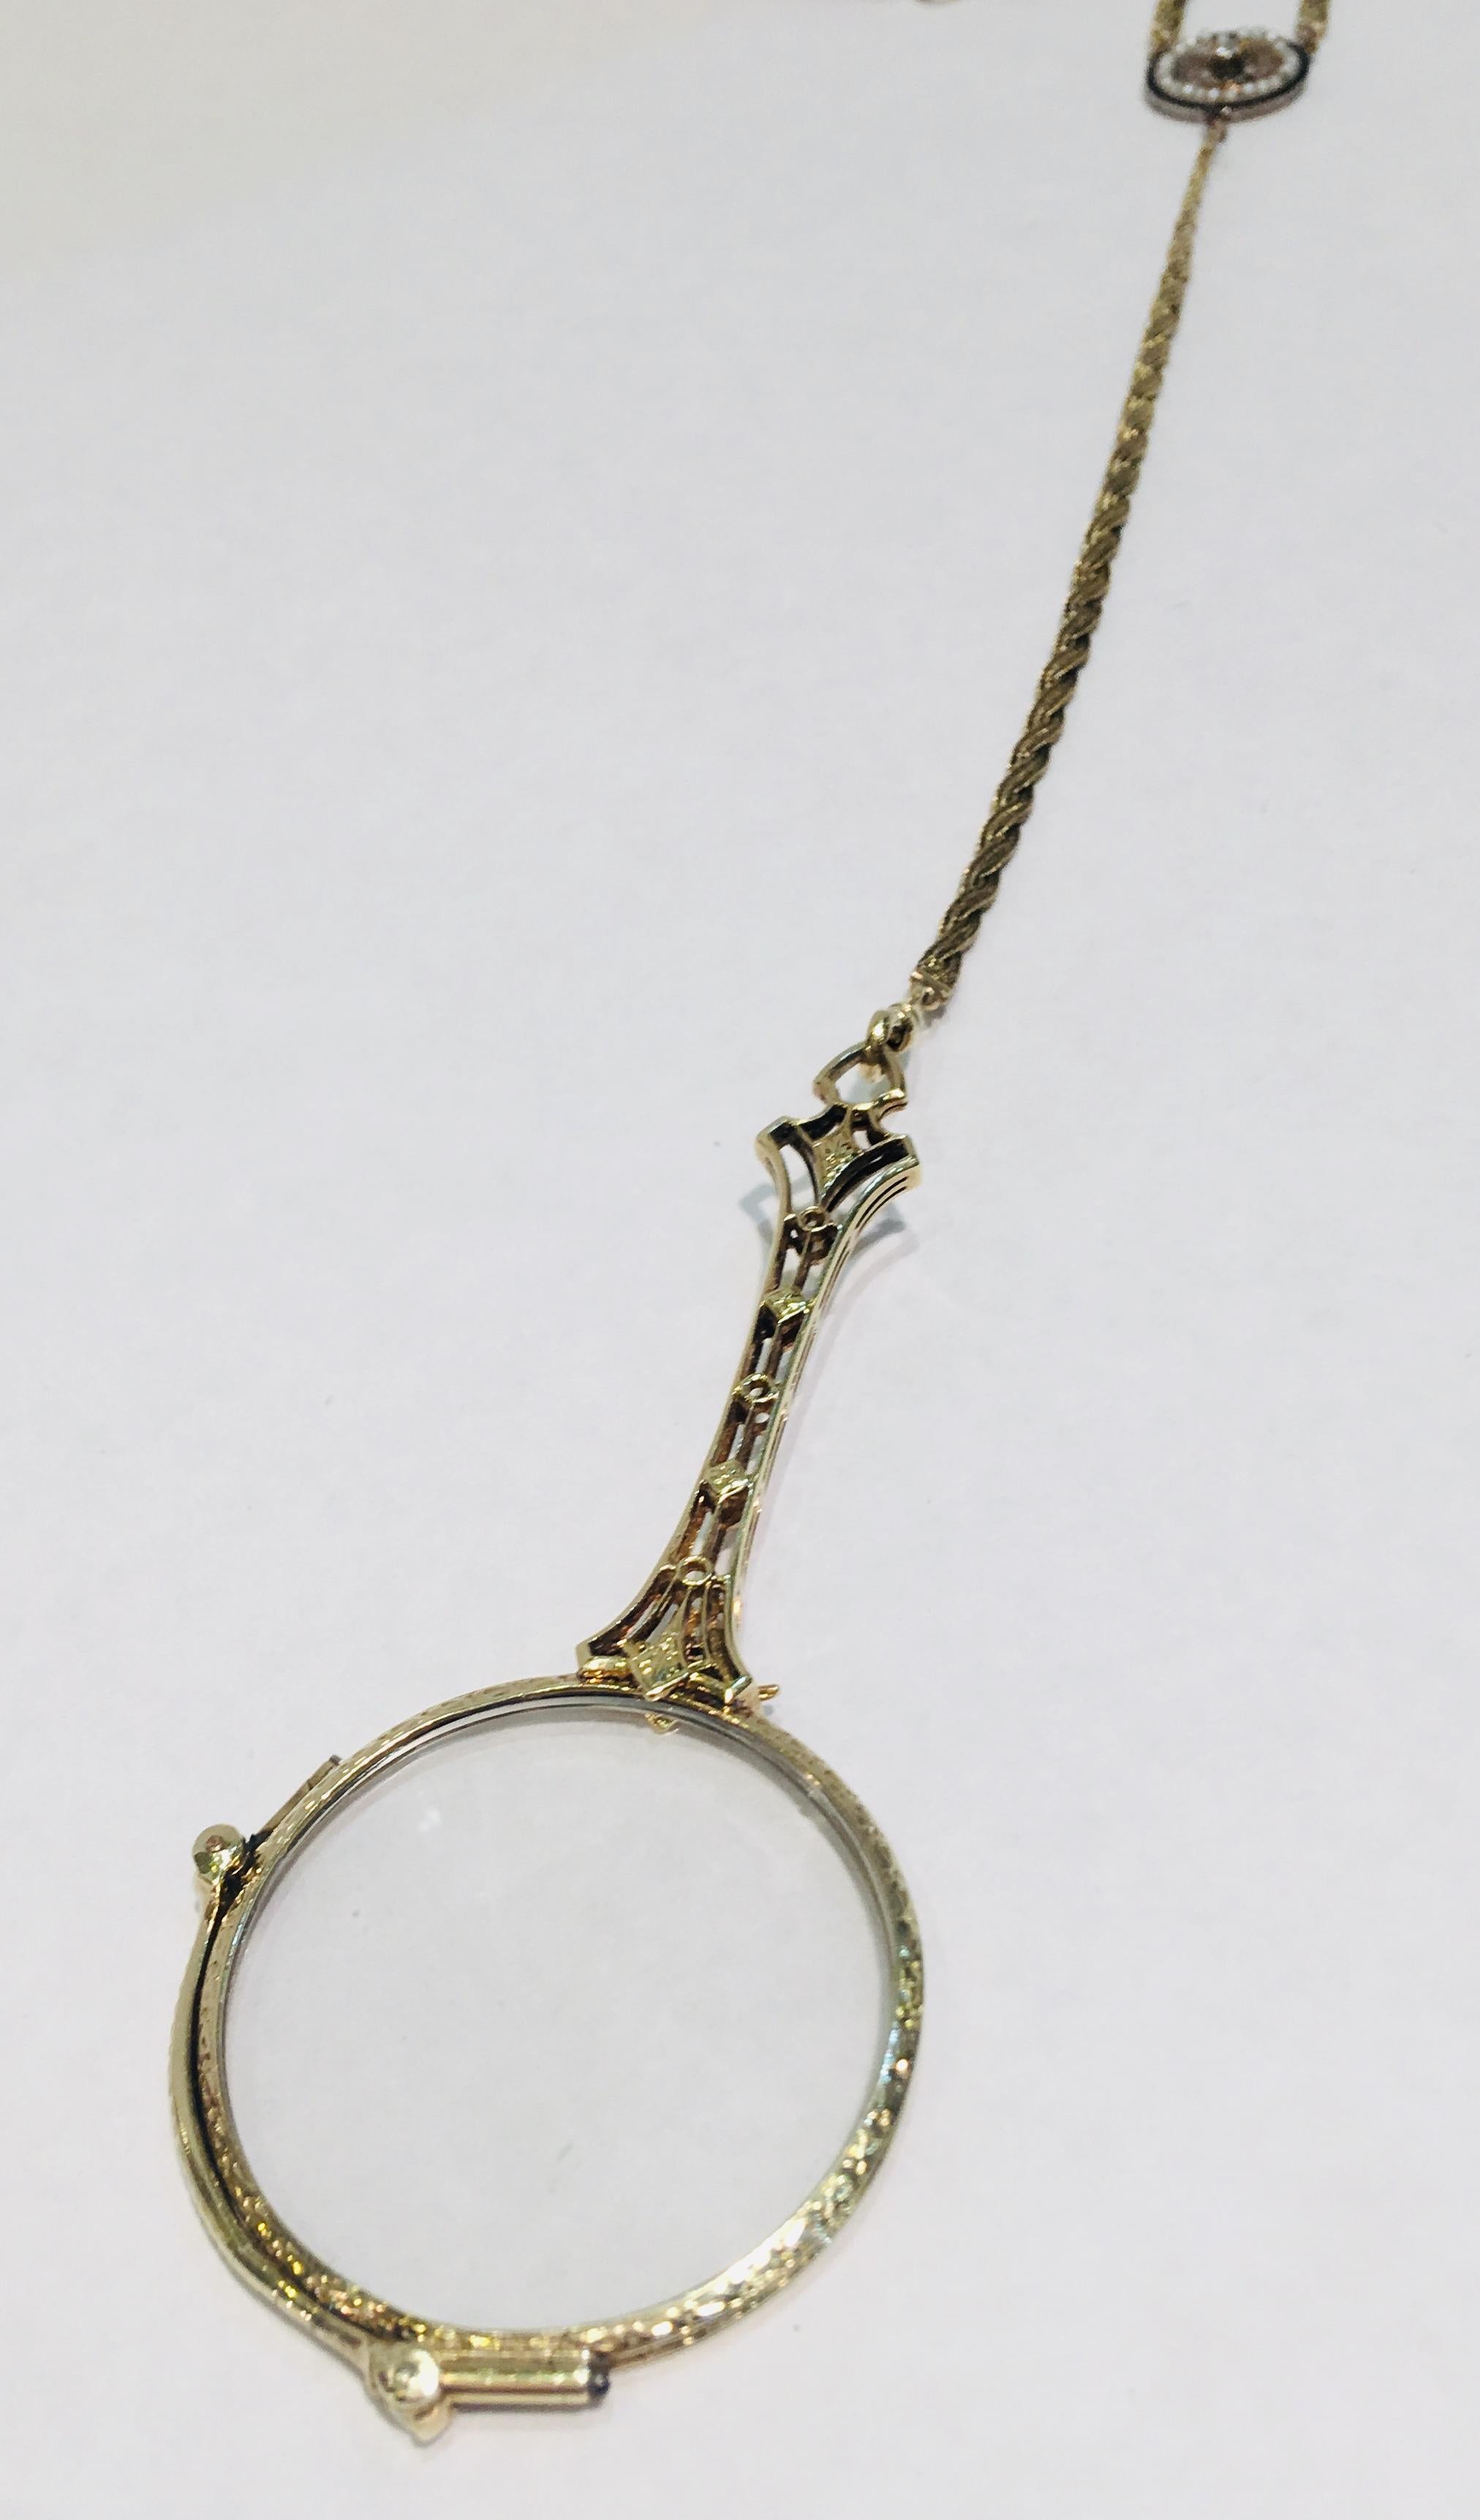 14 Karat Lorgnette Folding Eyeglasses with Gold, Diamond and Seed Pearls Lariat For Sale 7